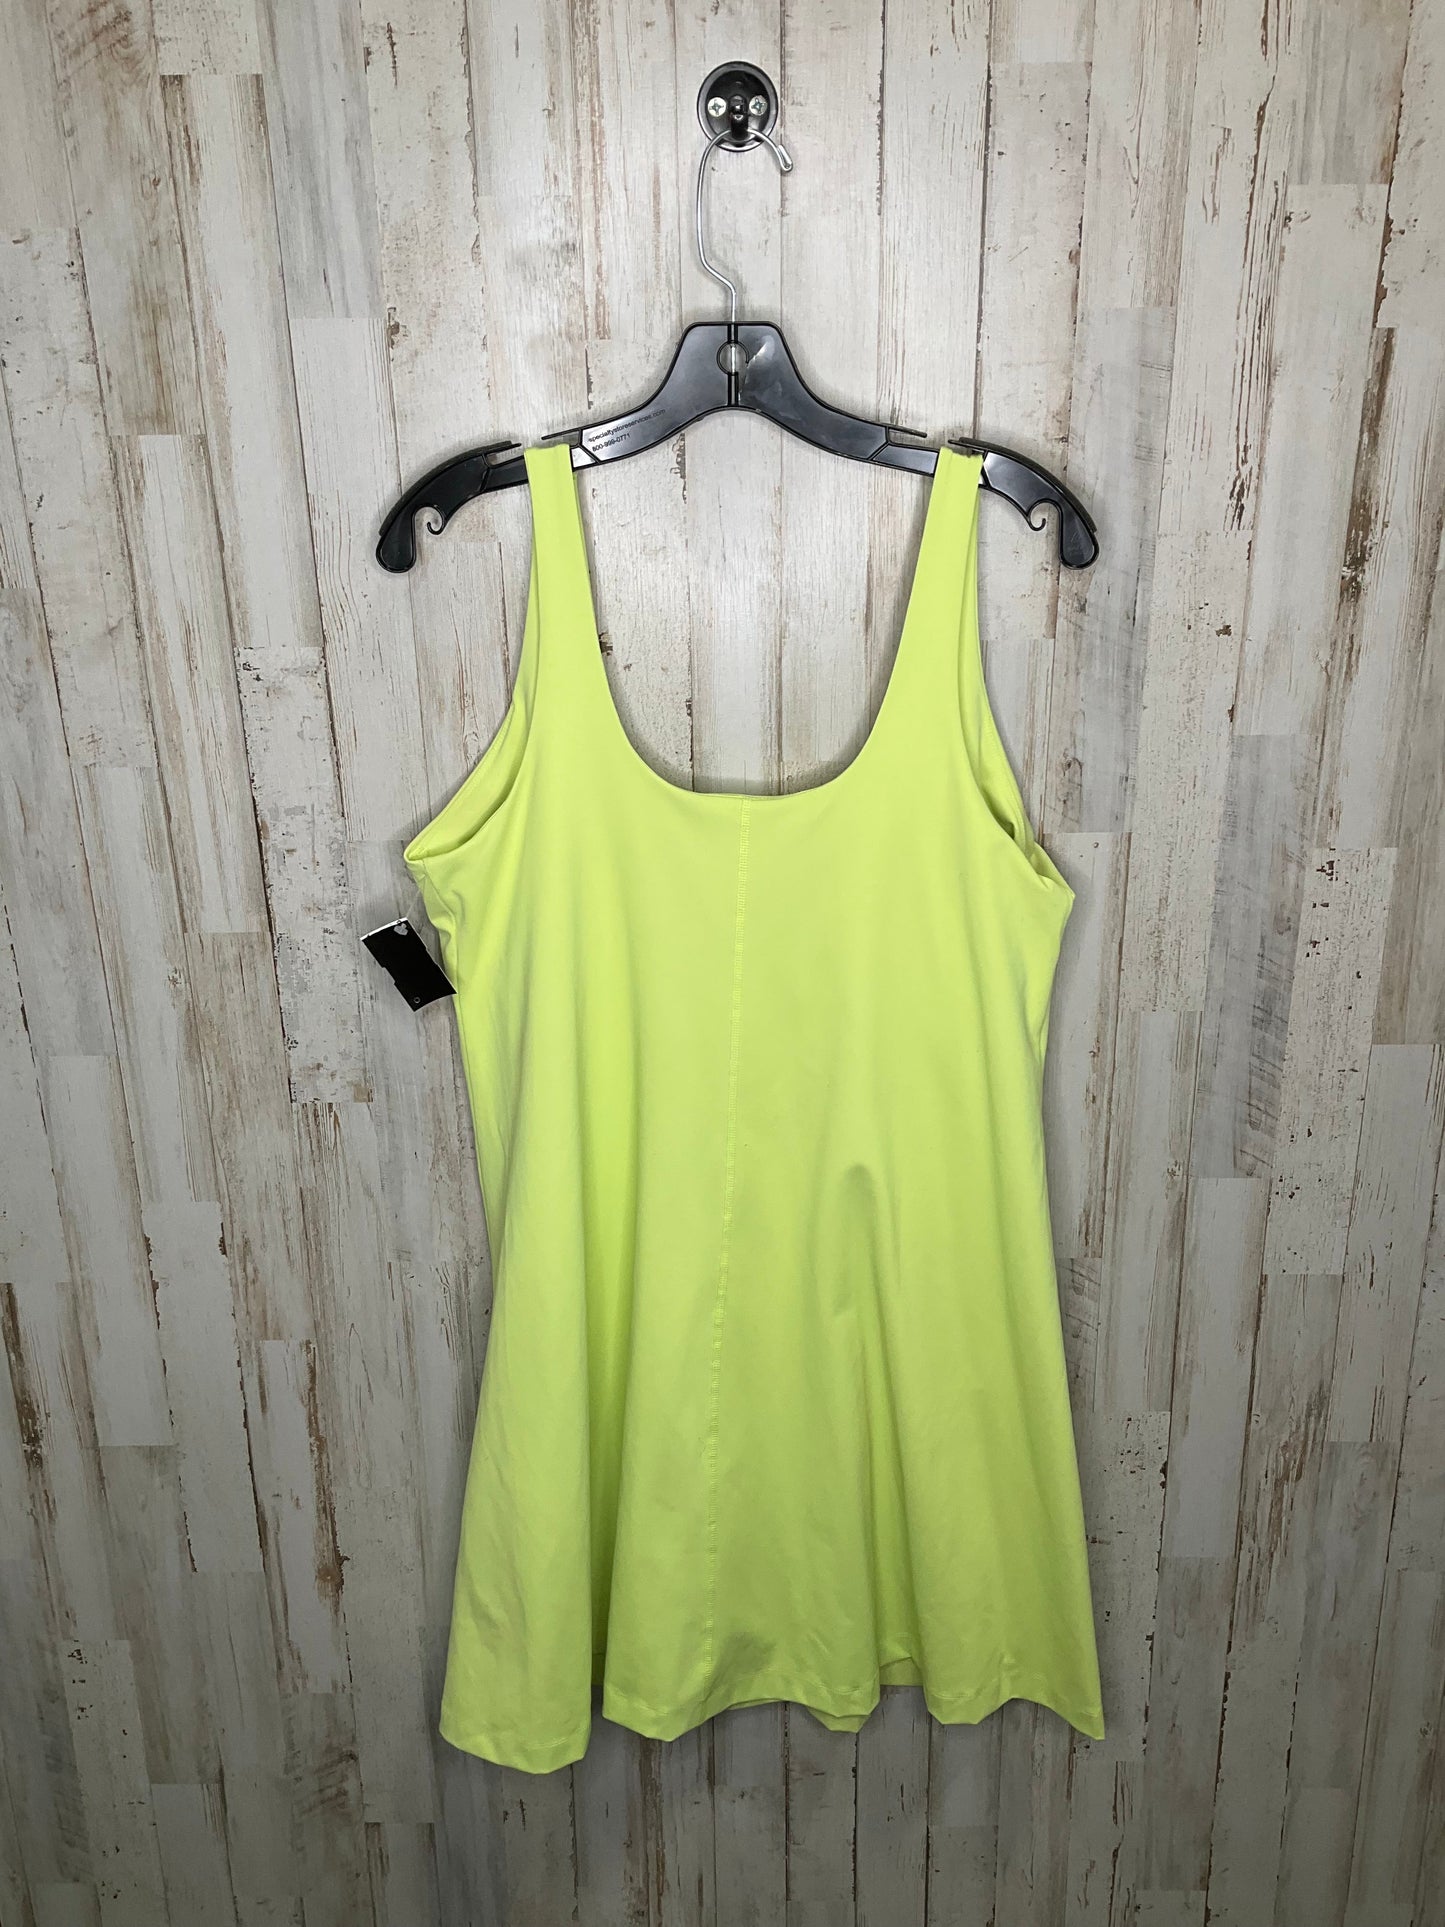 Green Athletic Dress Old Navy, Size Xl